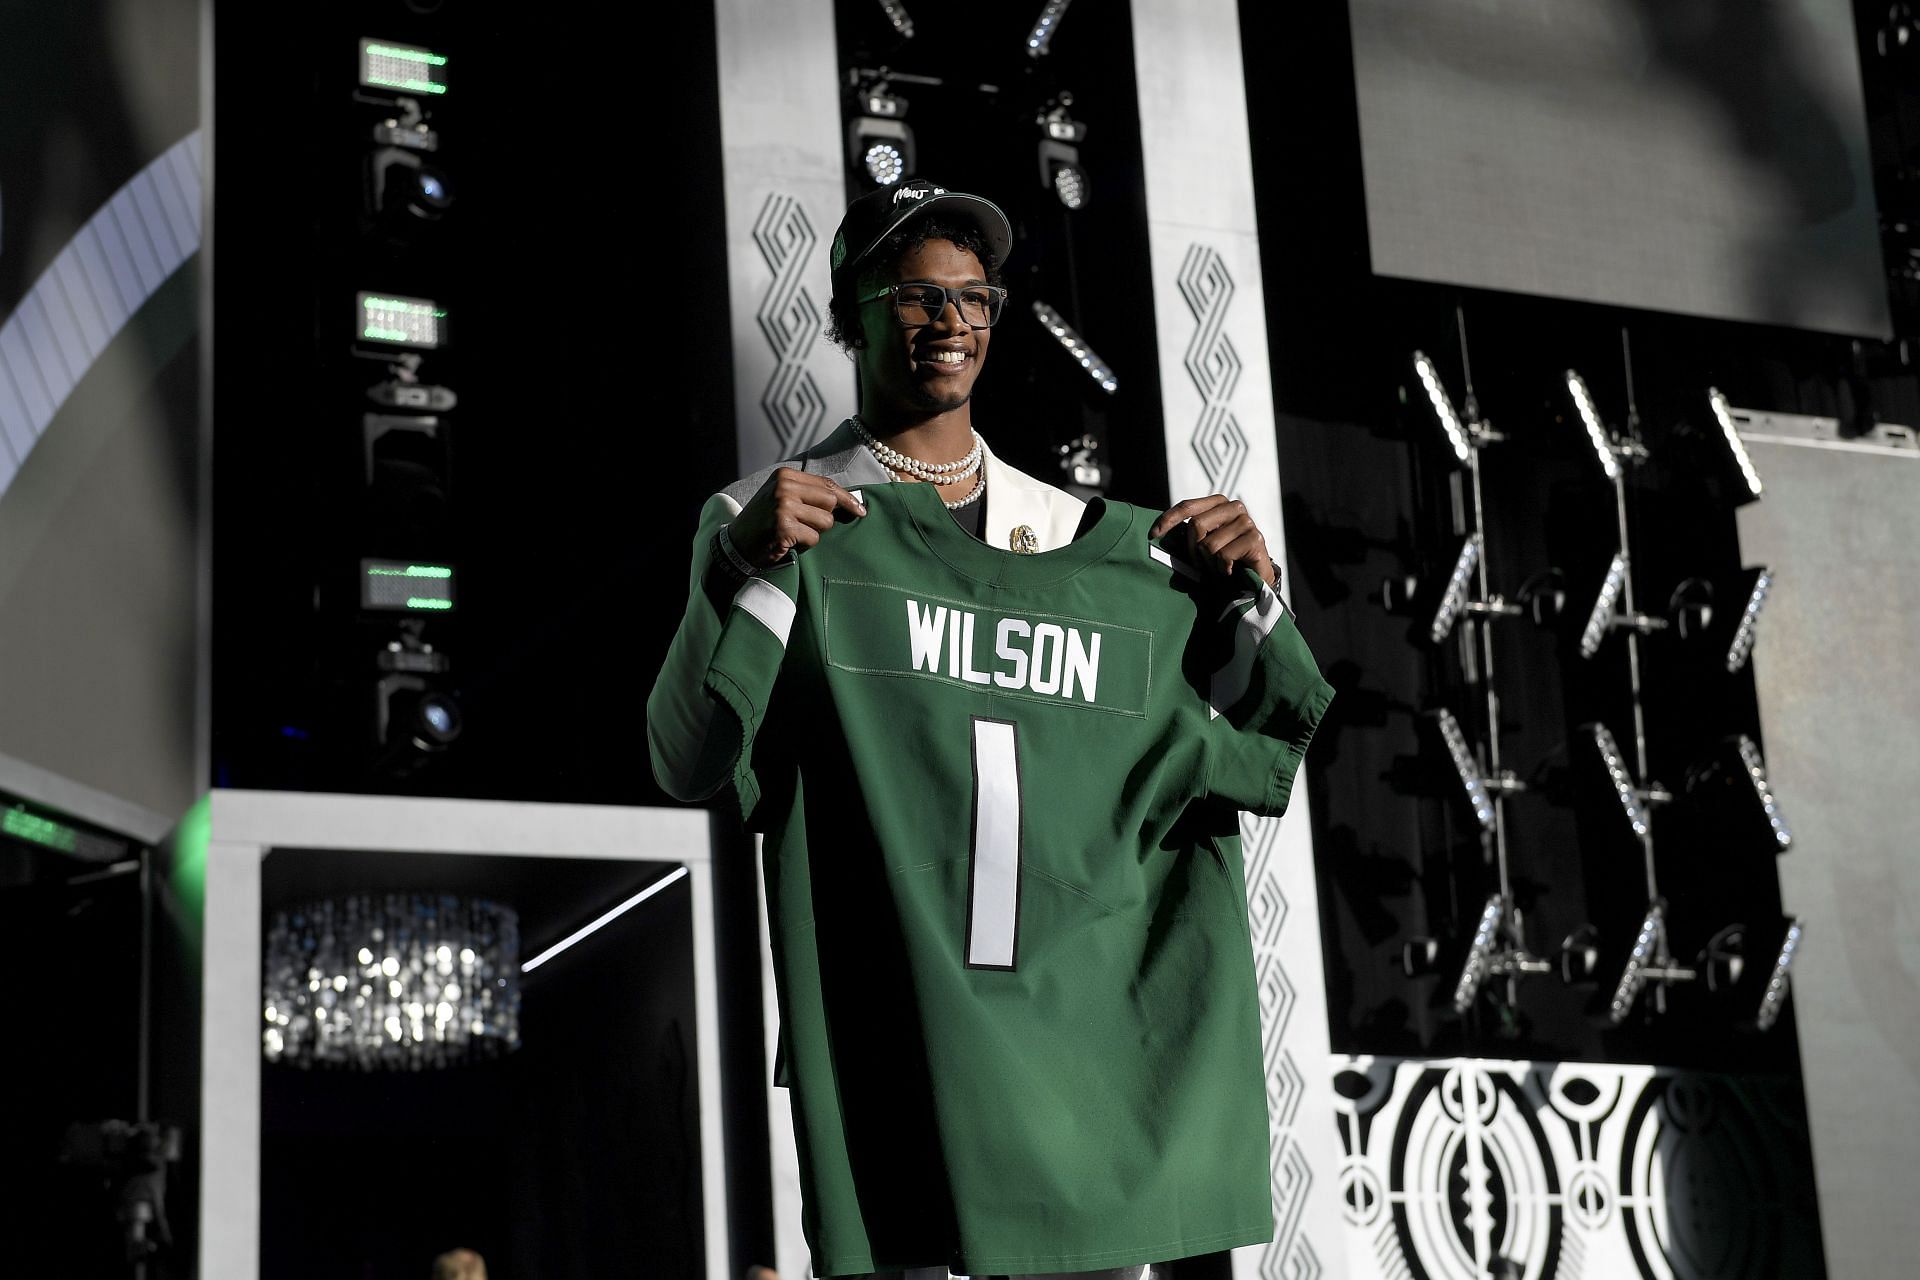 The 2022 NFL Draft brought wide receiver Garrett Wilson to the New York Jets